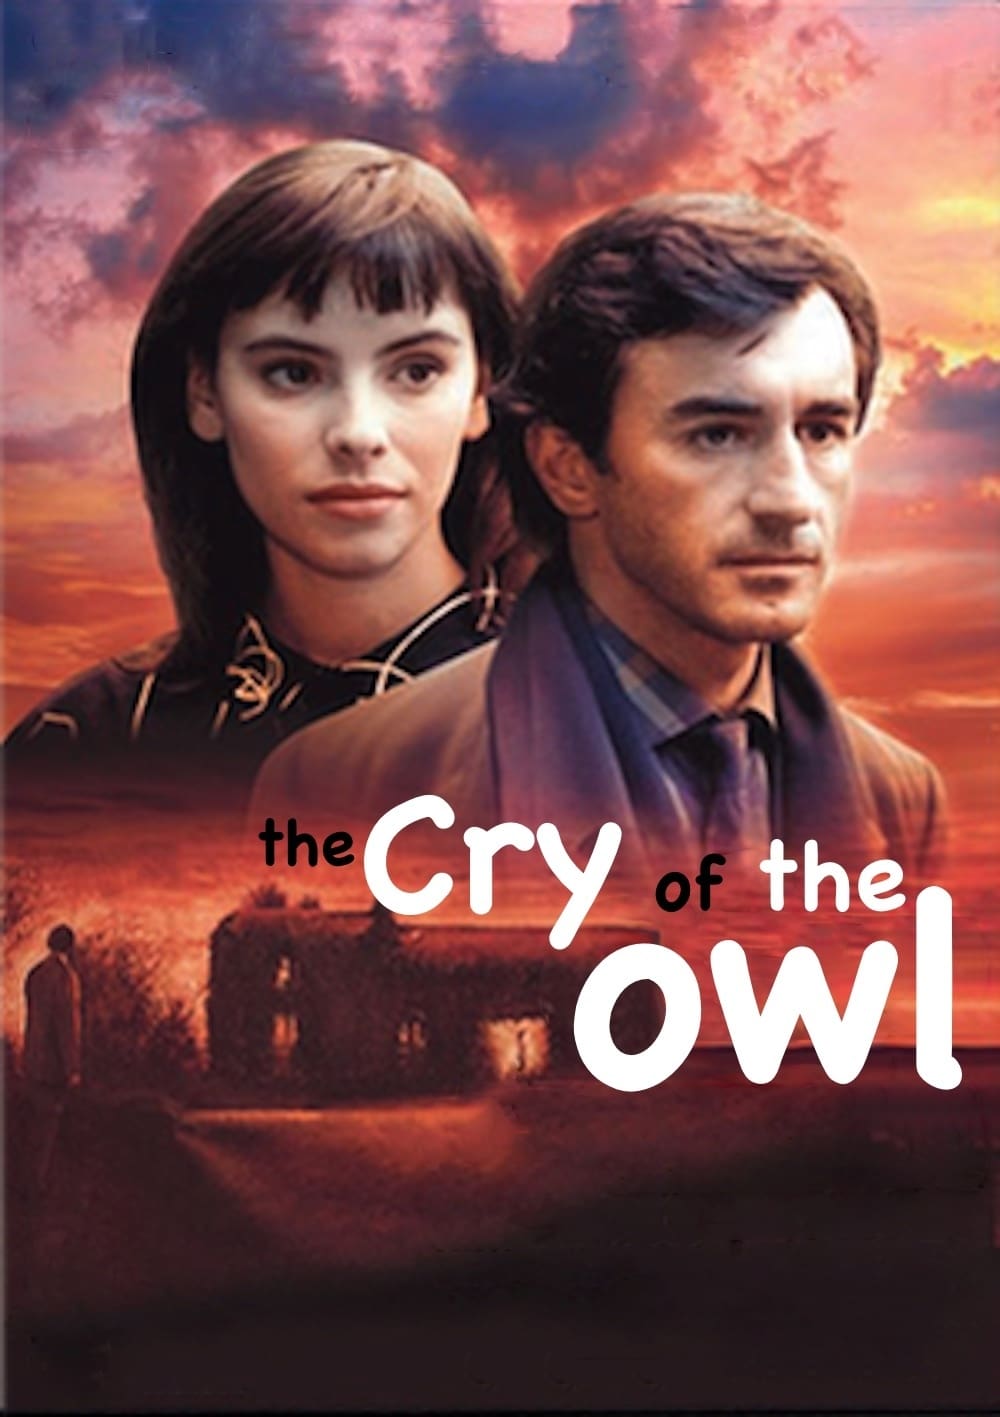 The Cry of the Owl